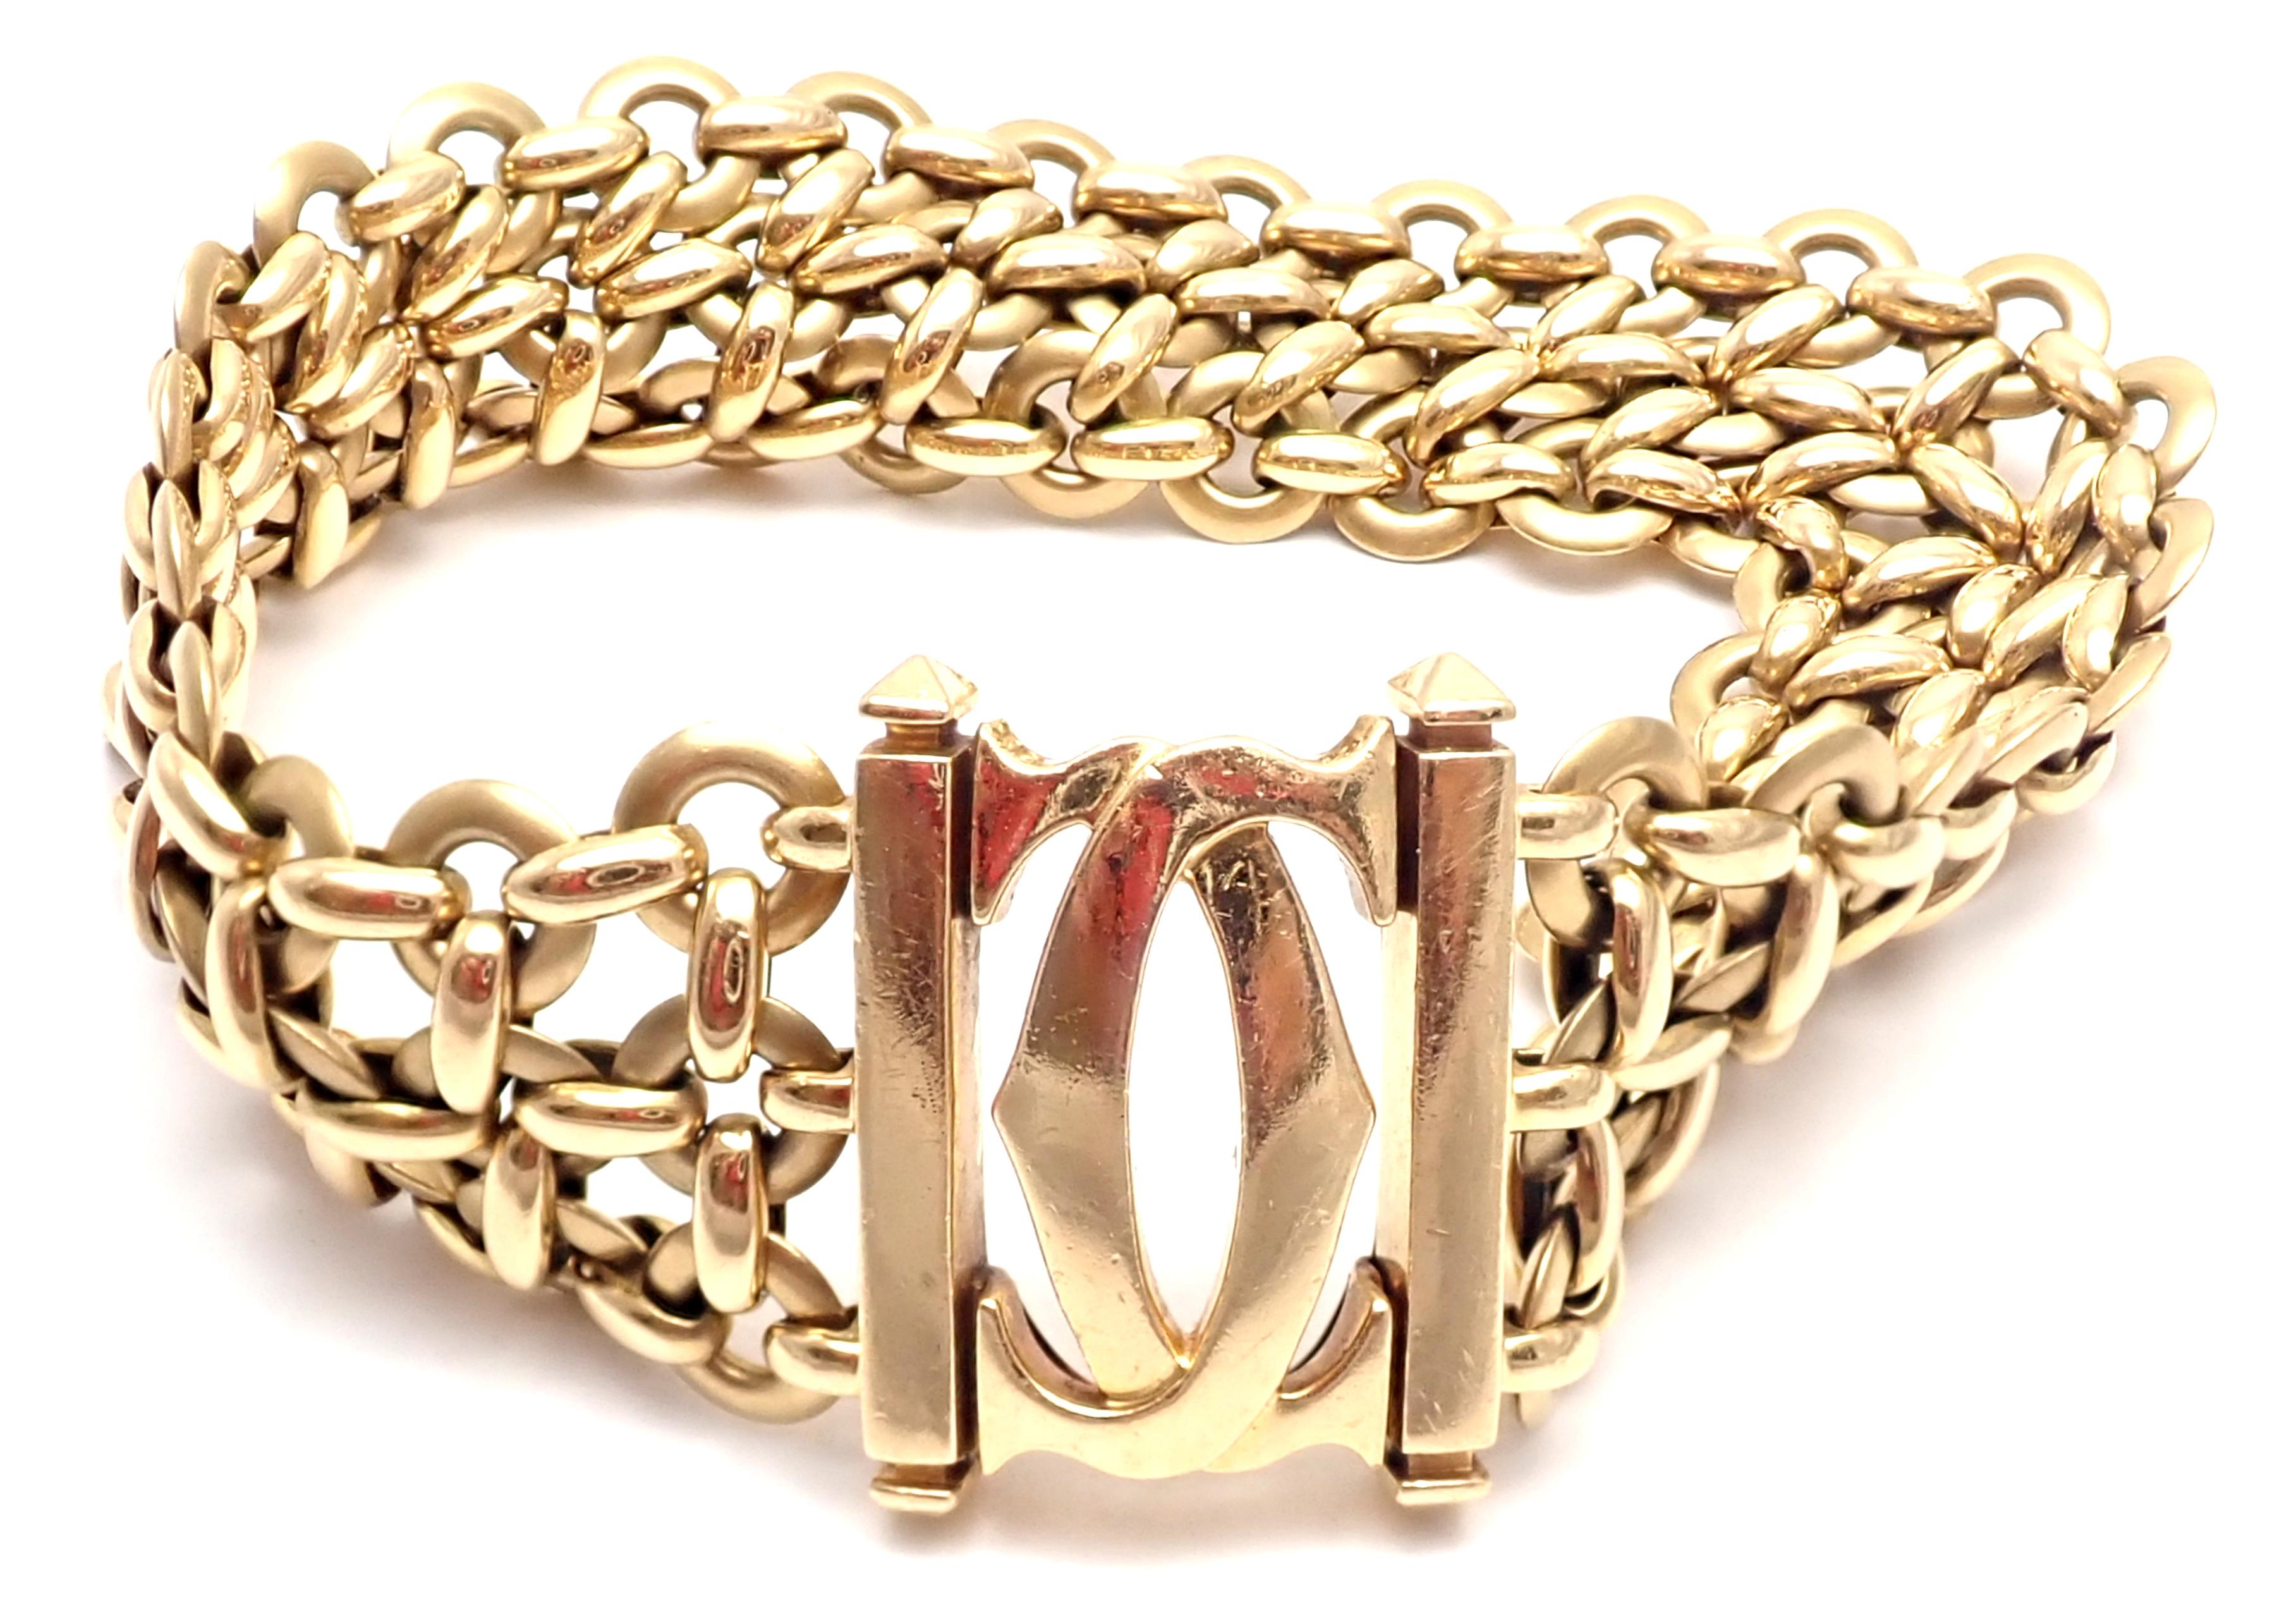 18k Yellow Gold Double C Three Row Wide Link Penelope Bracelet by Cartier. 
This bracelet comes with original Cartier box.
Details: 
Weight: 57.9 grams 
Length: 7